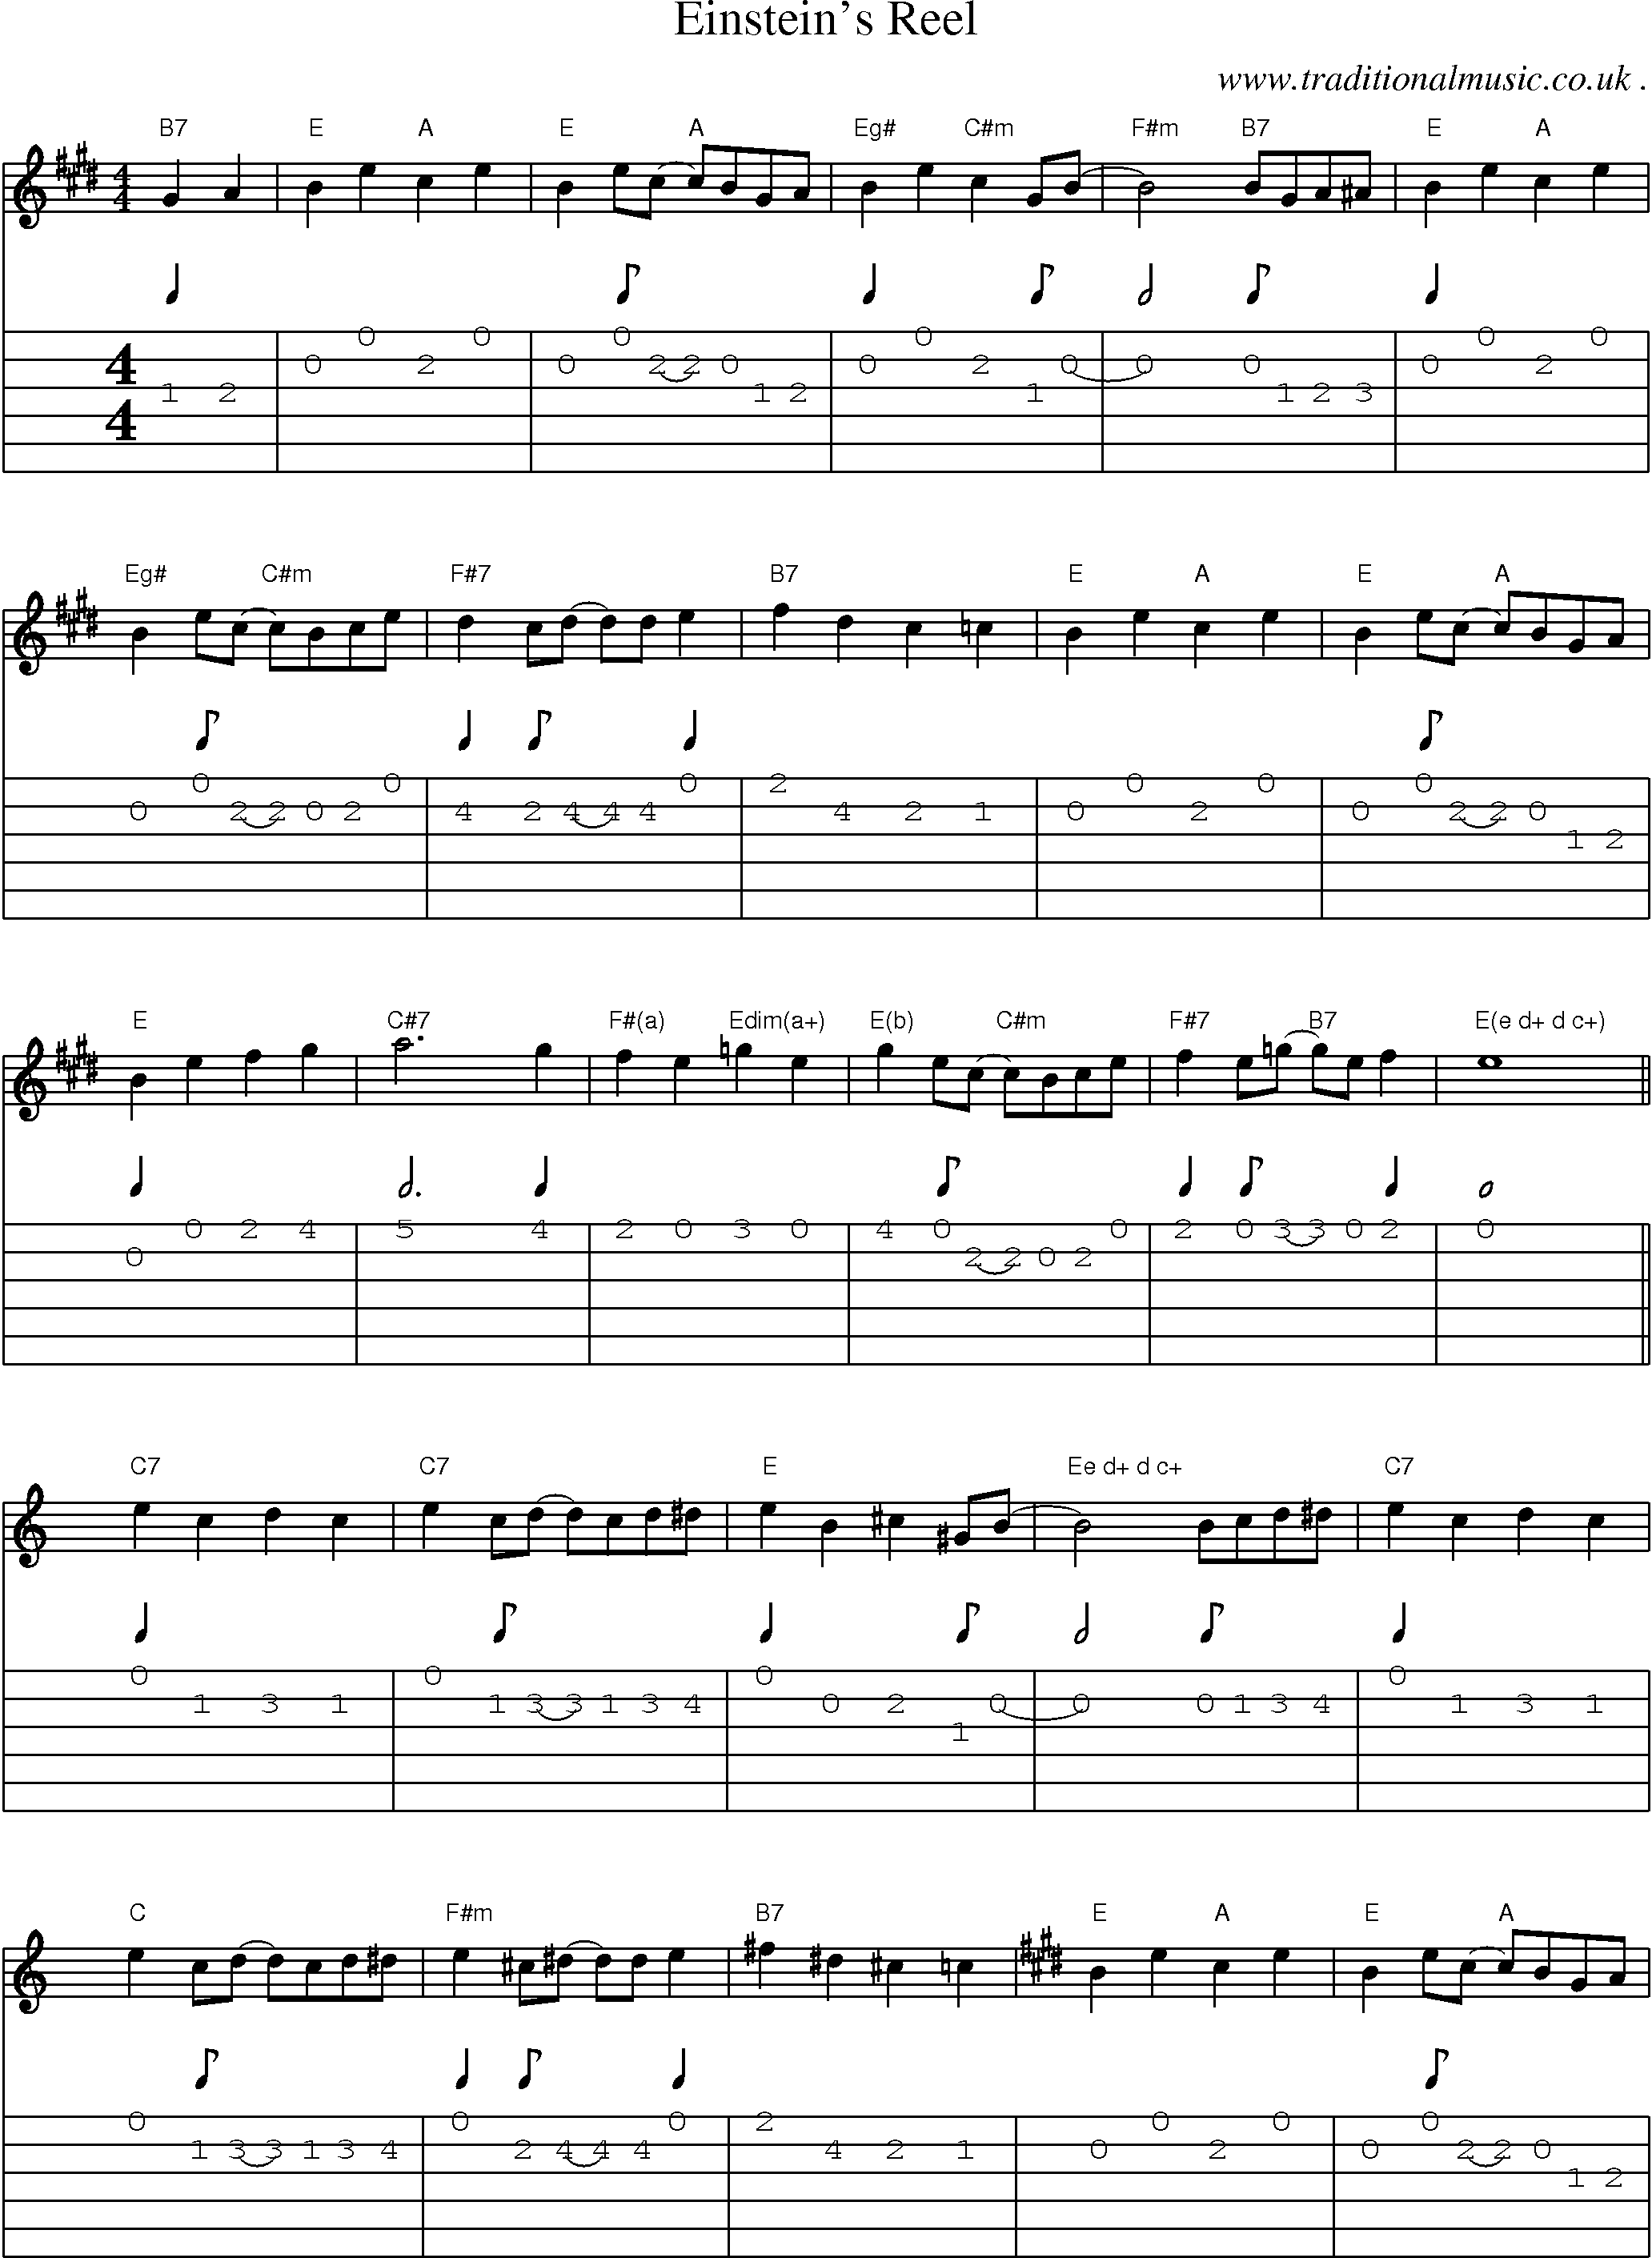 Sheet-Music and Guitar Tabs for Einsteins Reel